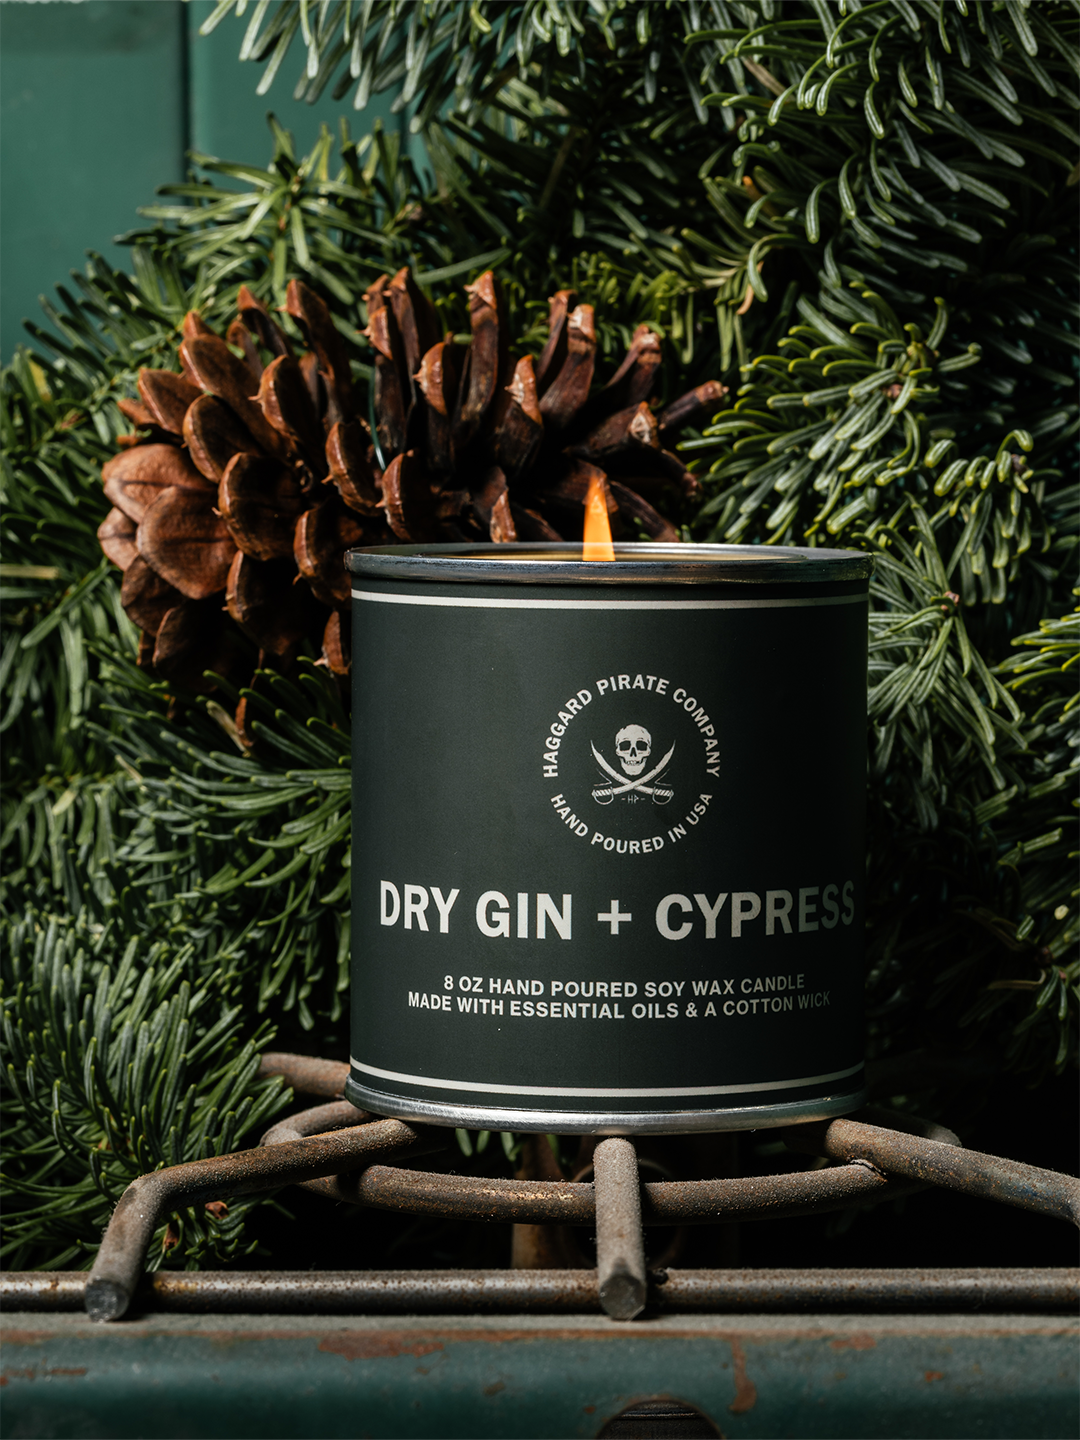 The Hand Poured Dry Gin + Cypress Candle